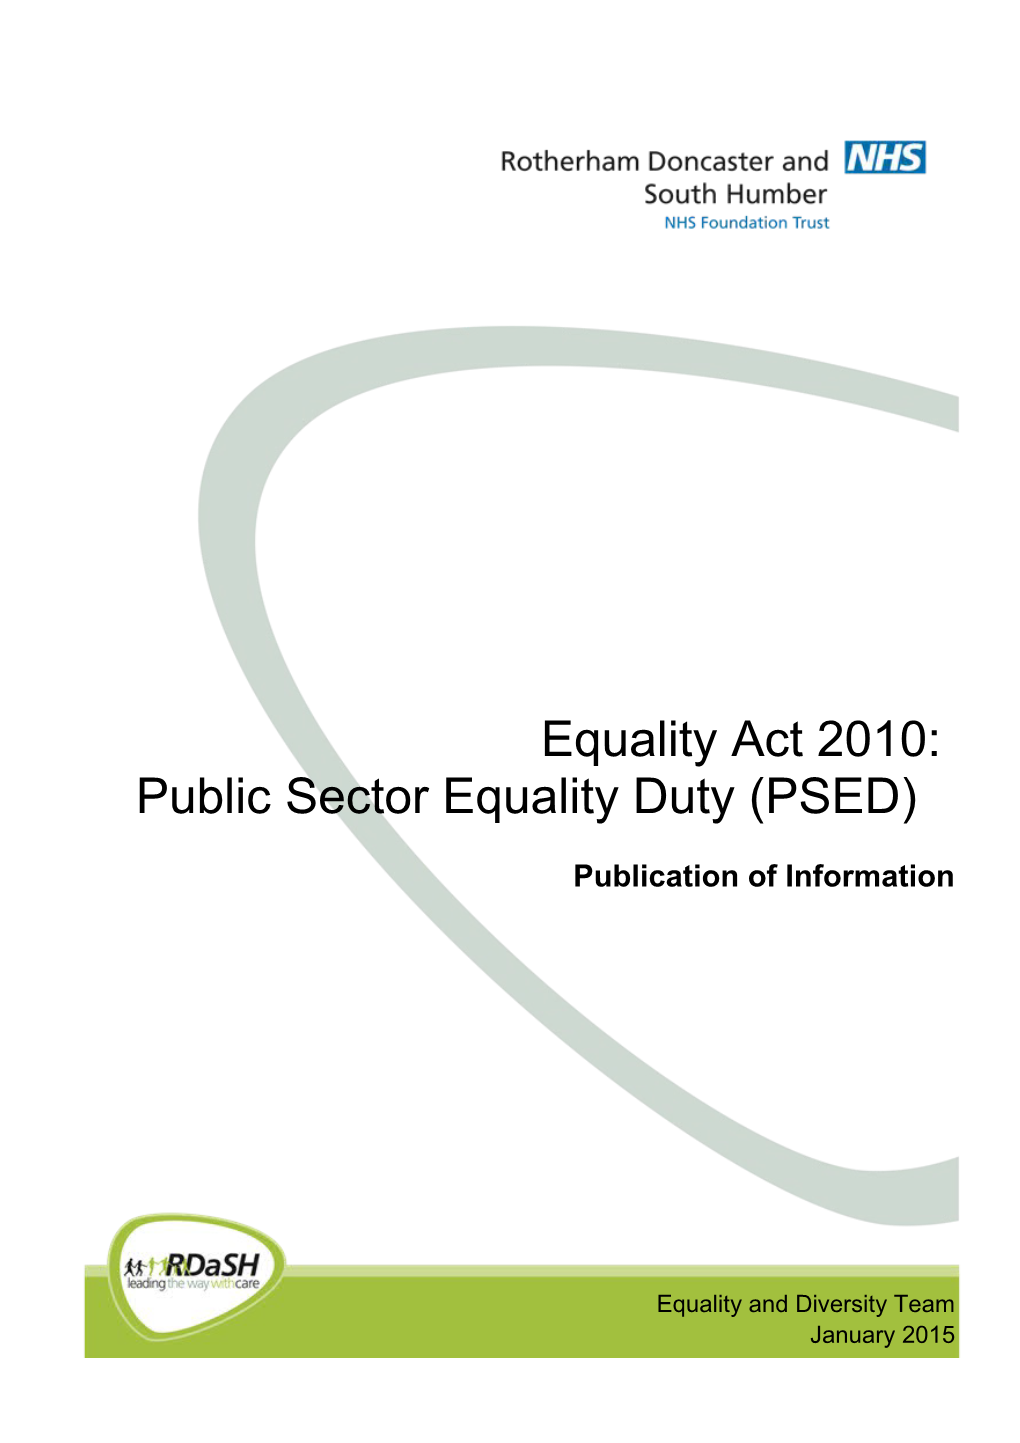 1.3The Public Sector Equality Duty (PSED)